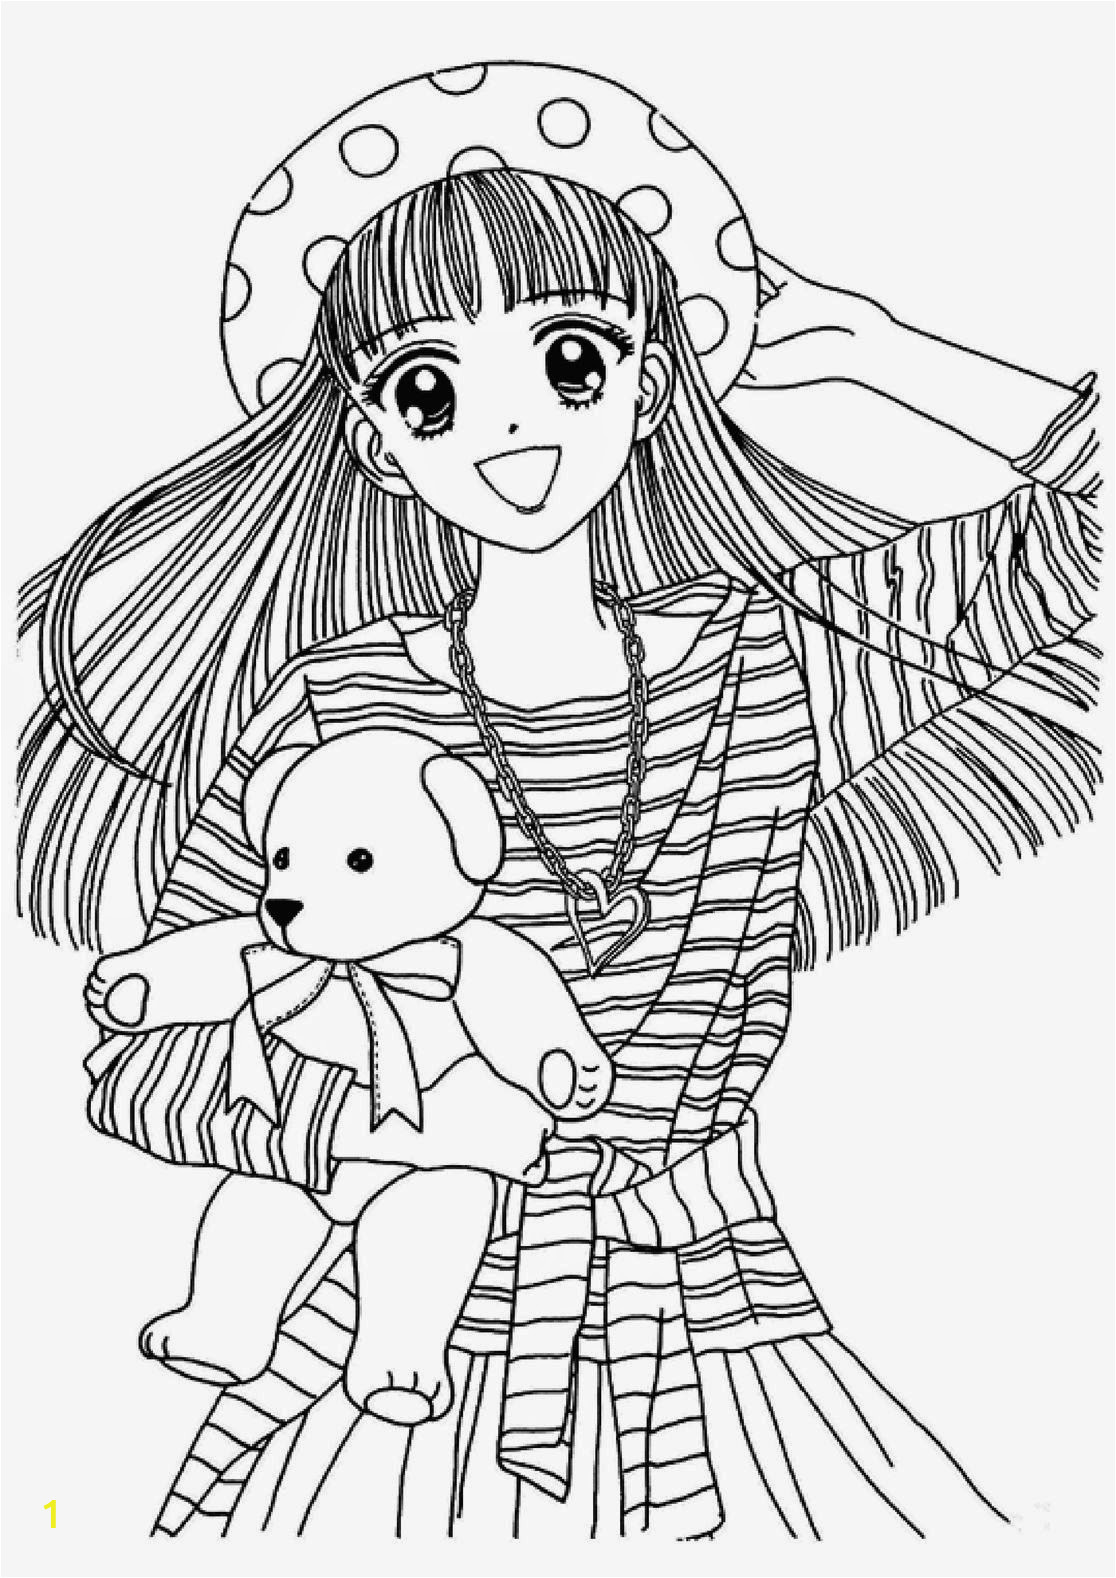 Anime Girl Coloring Pages for Adults Coloring Pages Anime Coloring Pages Free and Printable